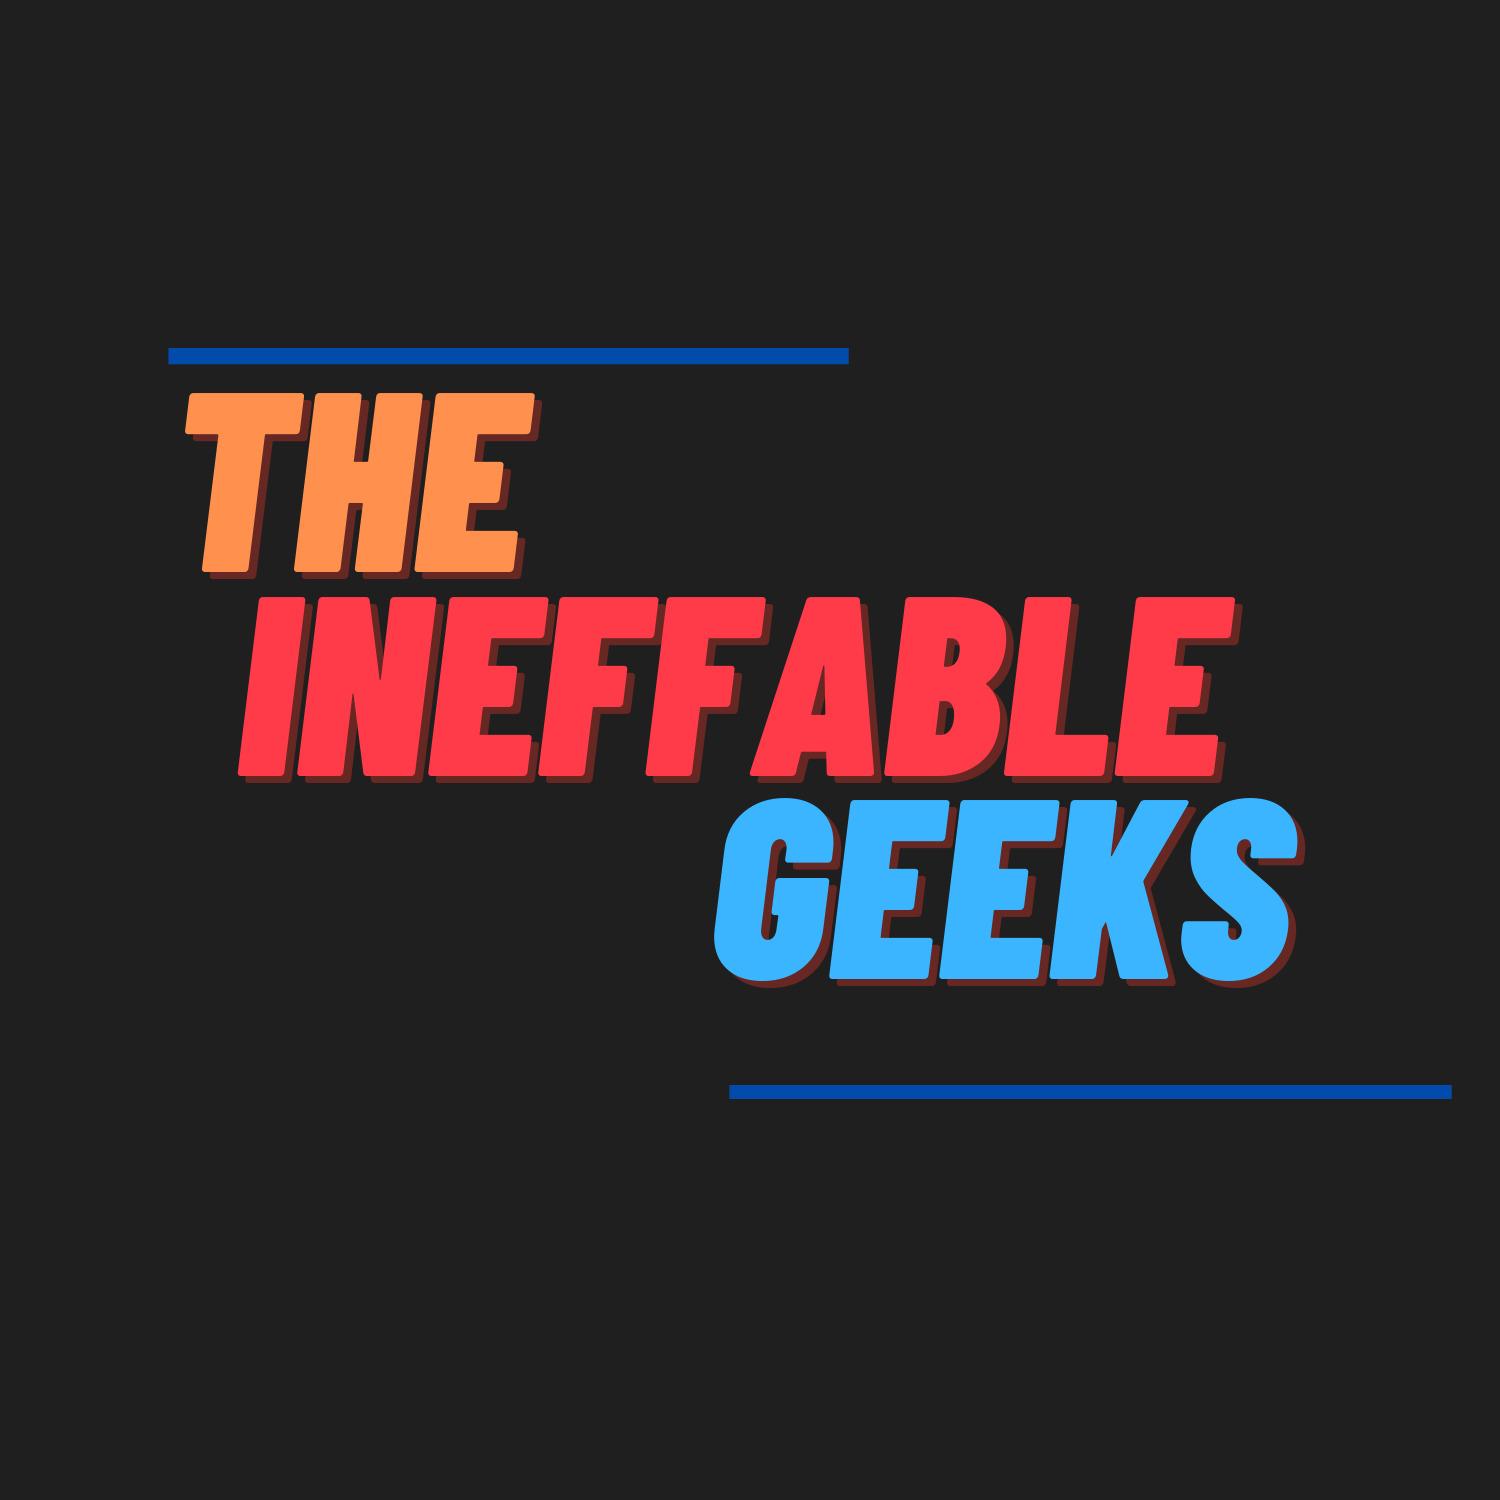 The Ineffable Geeks